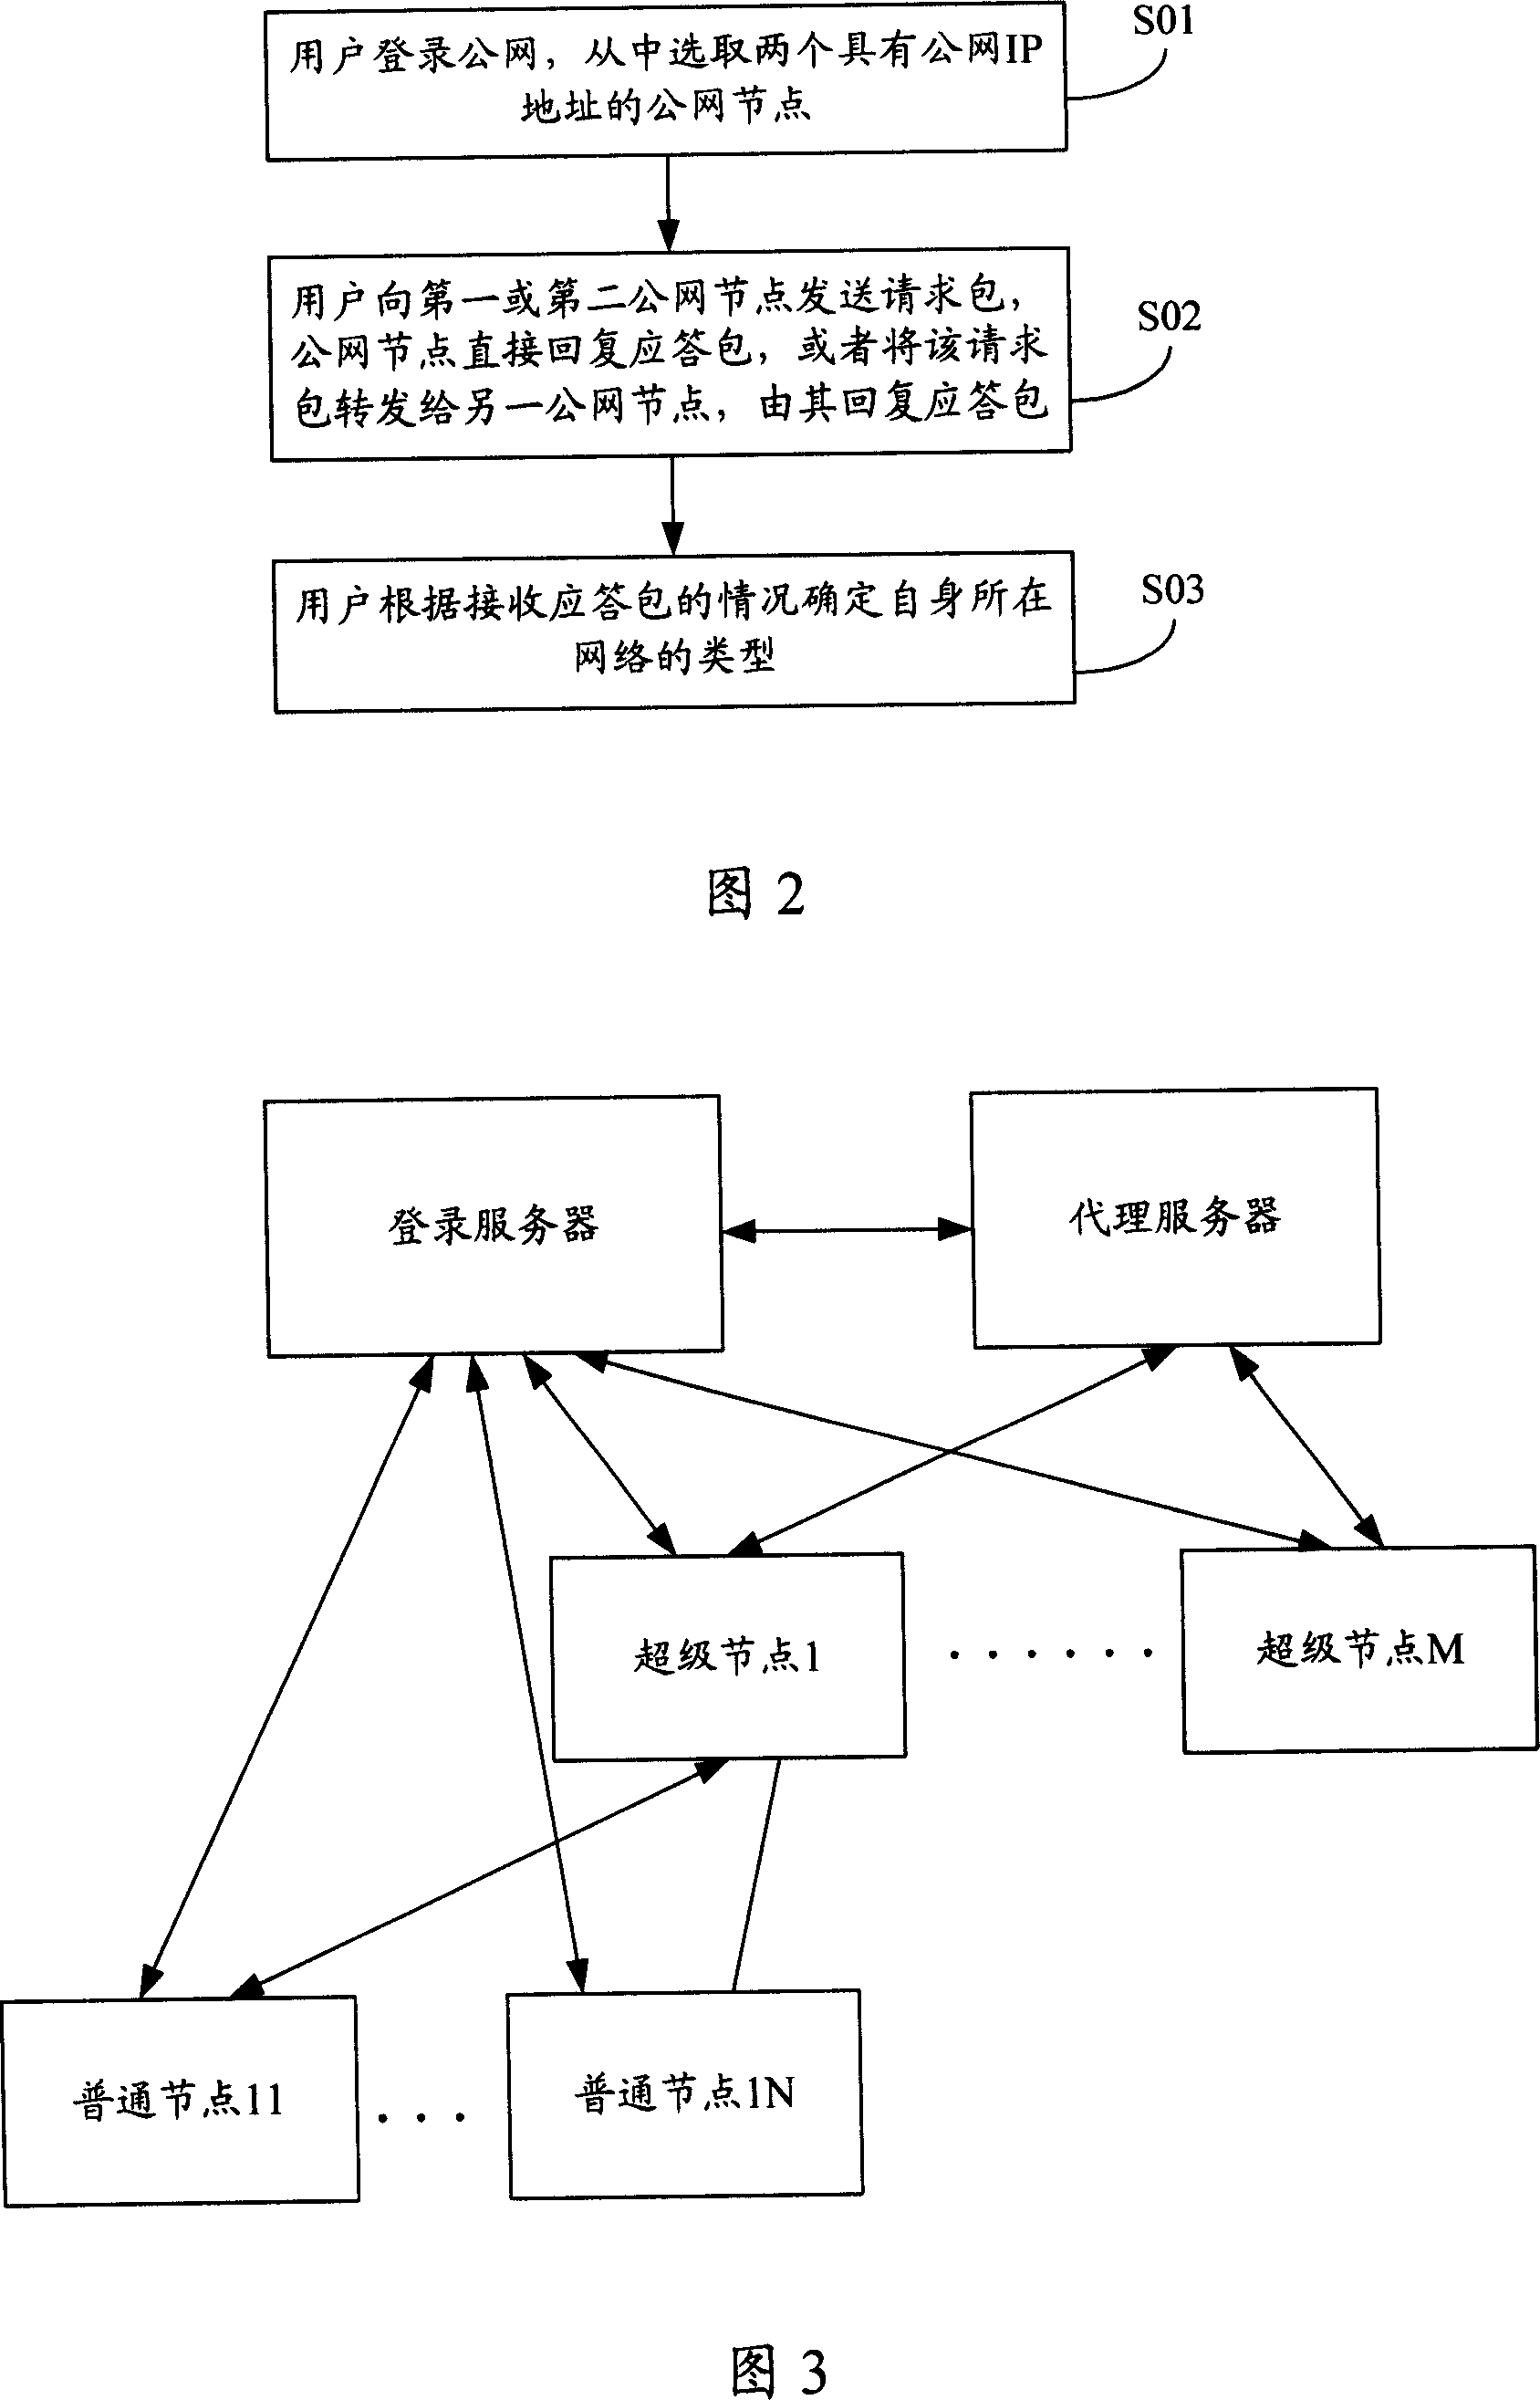 Method and system for detecting network types